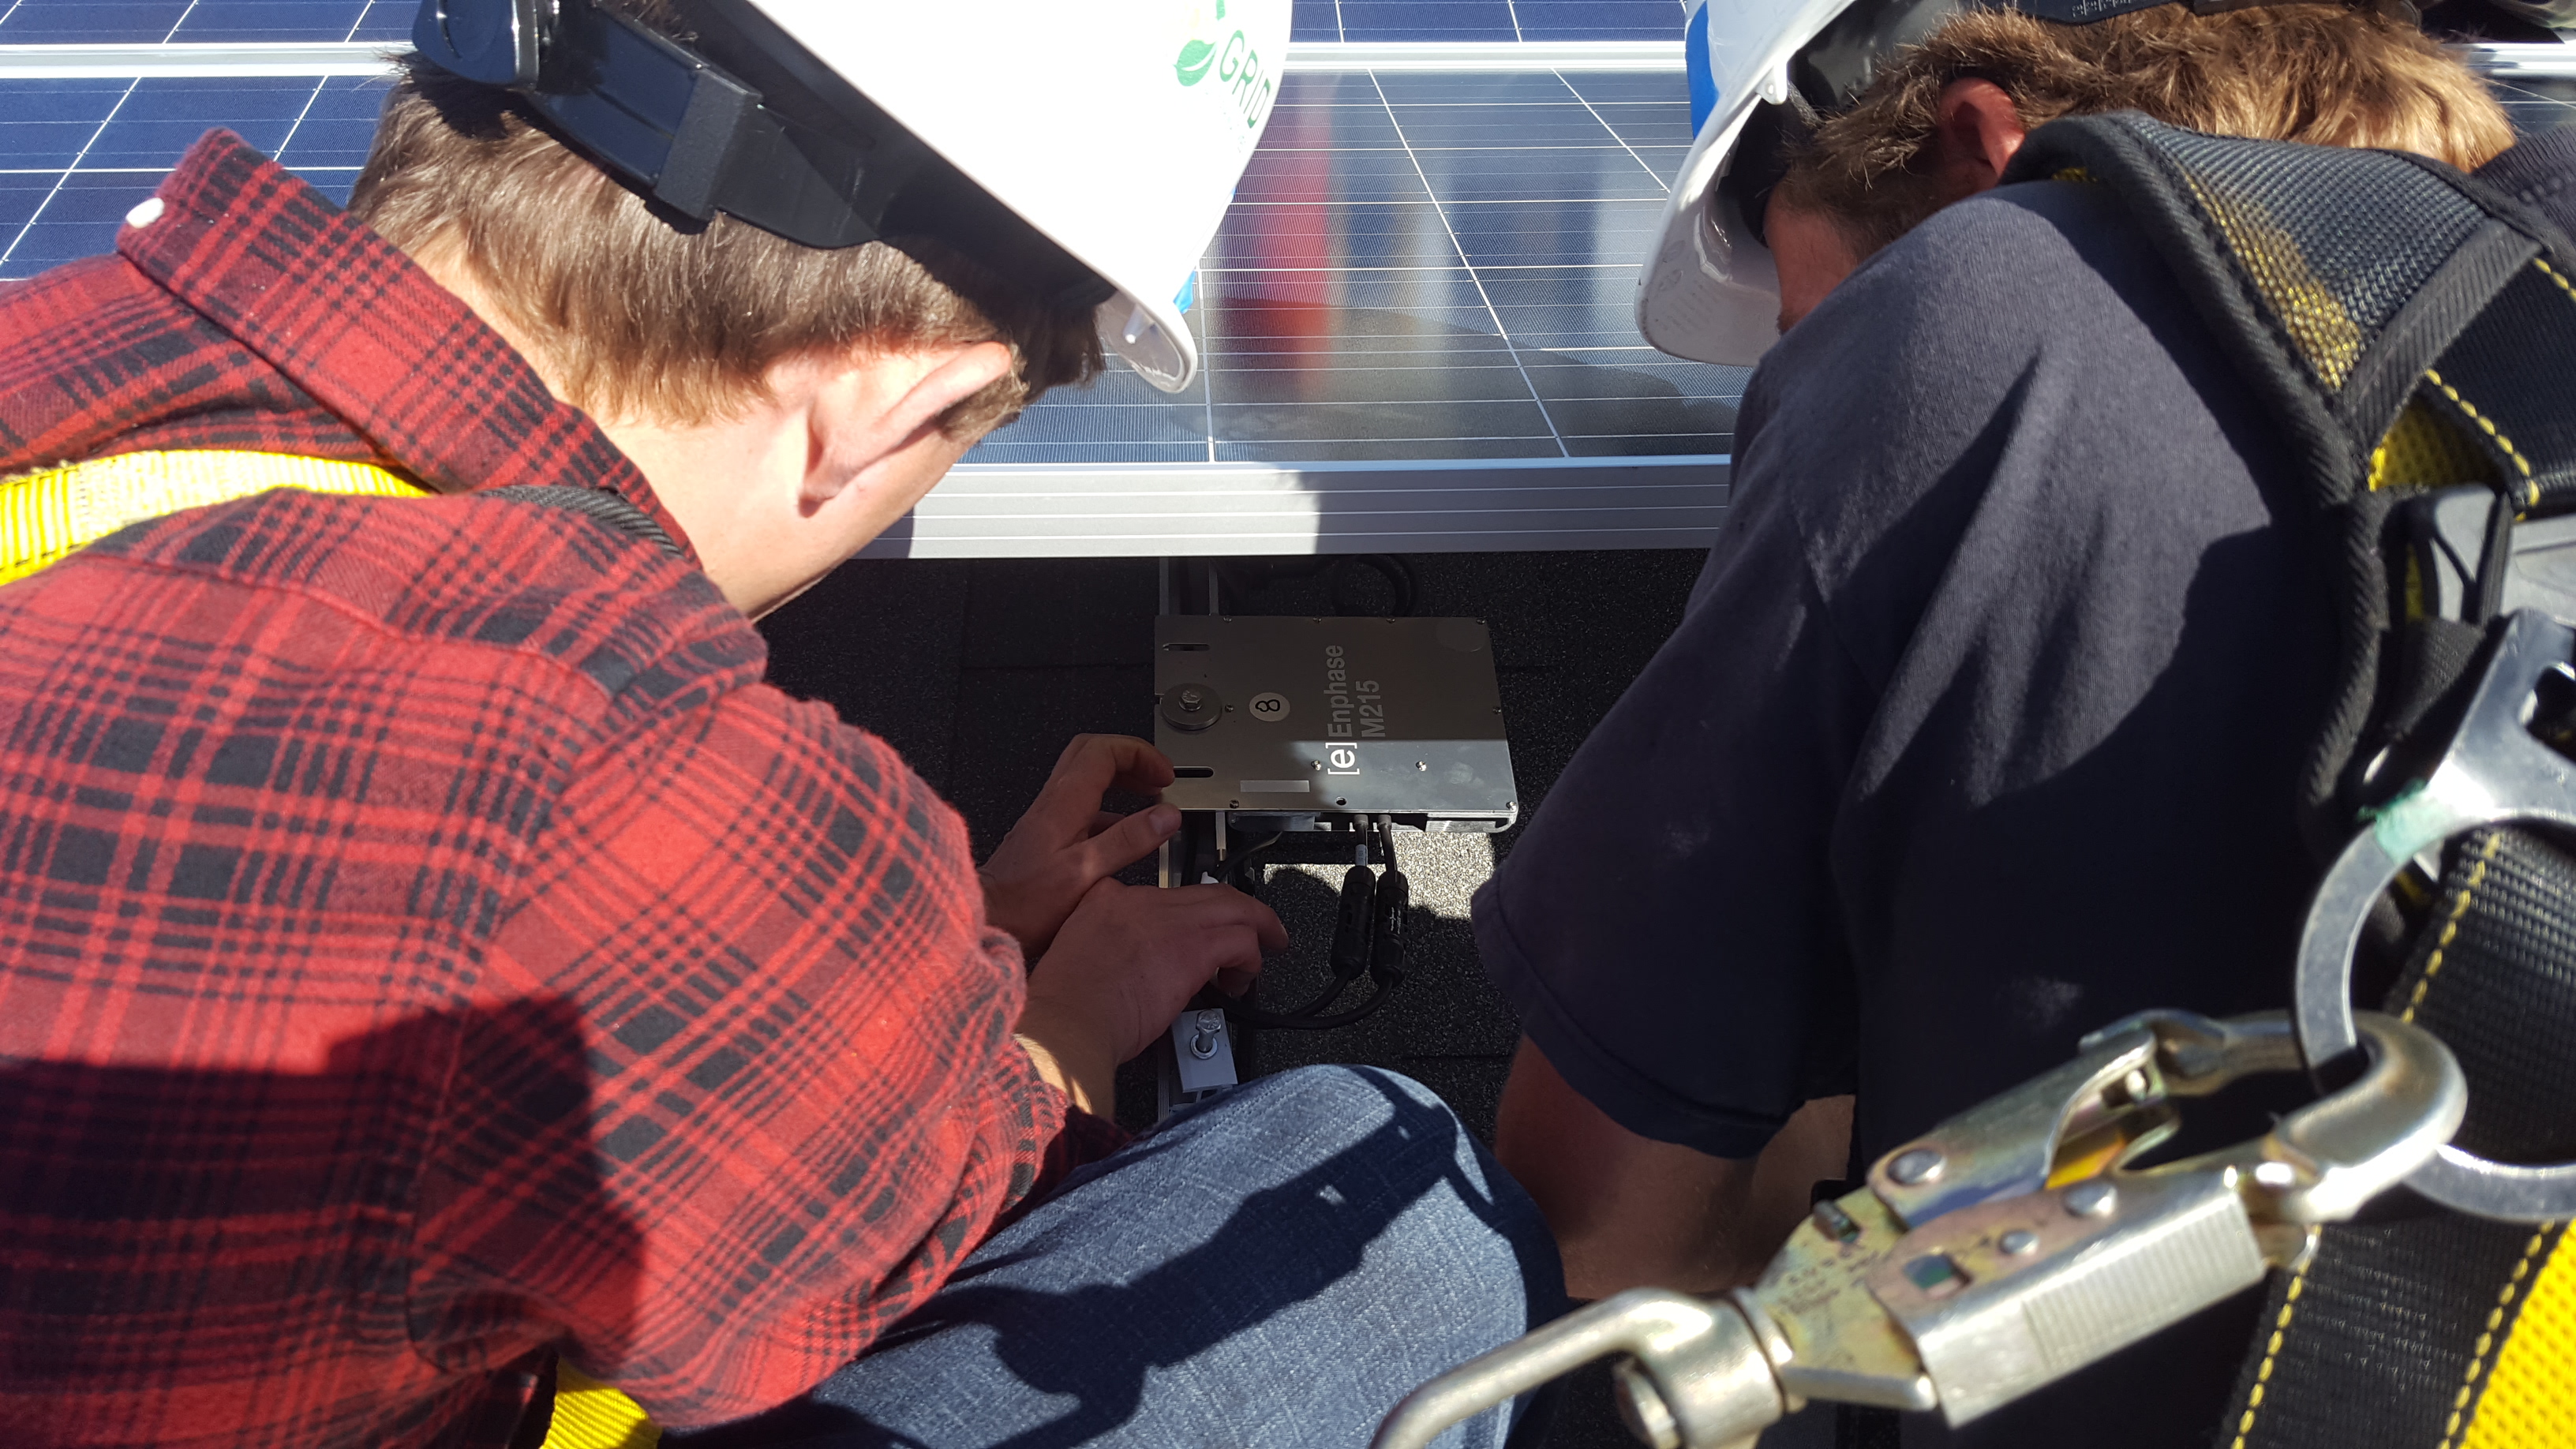 Students installing microinverters in PV installation